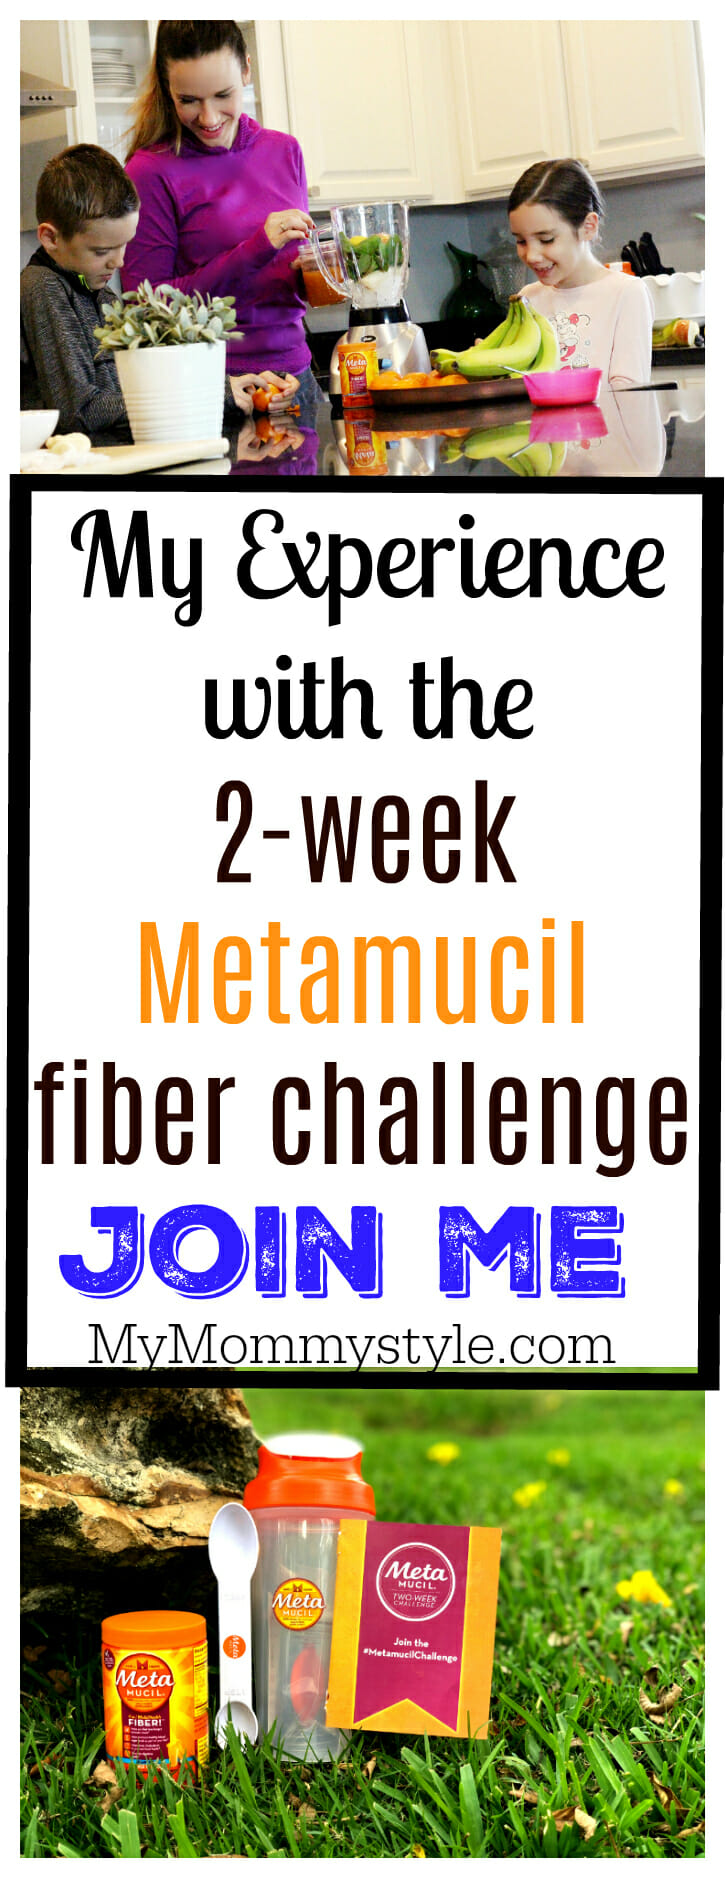 The Metamucil challenge is a simple way to get more fiber in our diet, live healthier and feel better in just 2 weeks. This 14 day cleanse helps us eliminate all of the waste! via @mymommystyle